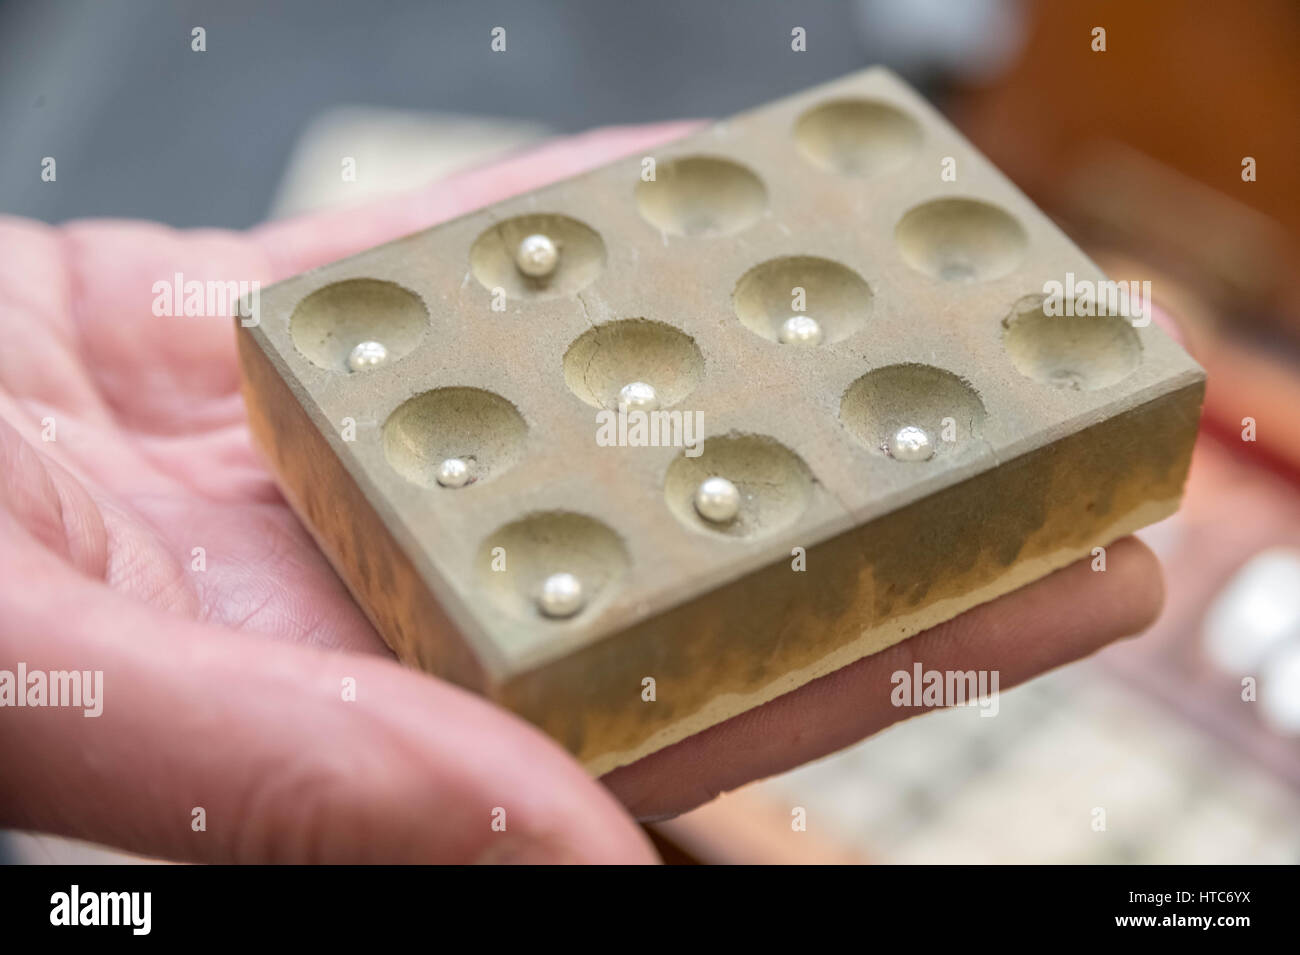 Metallurgical assaying. Precious metal purity tests at The Assay Office in London, UK. Stock Photo